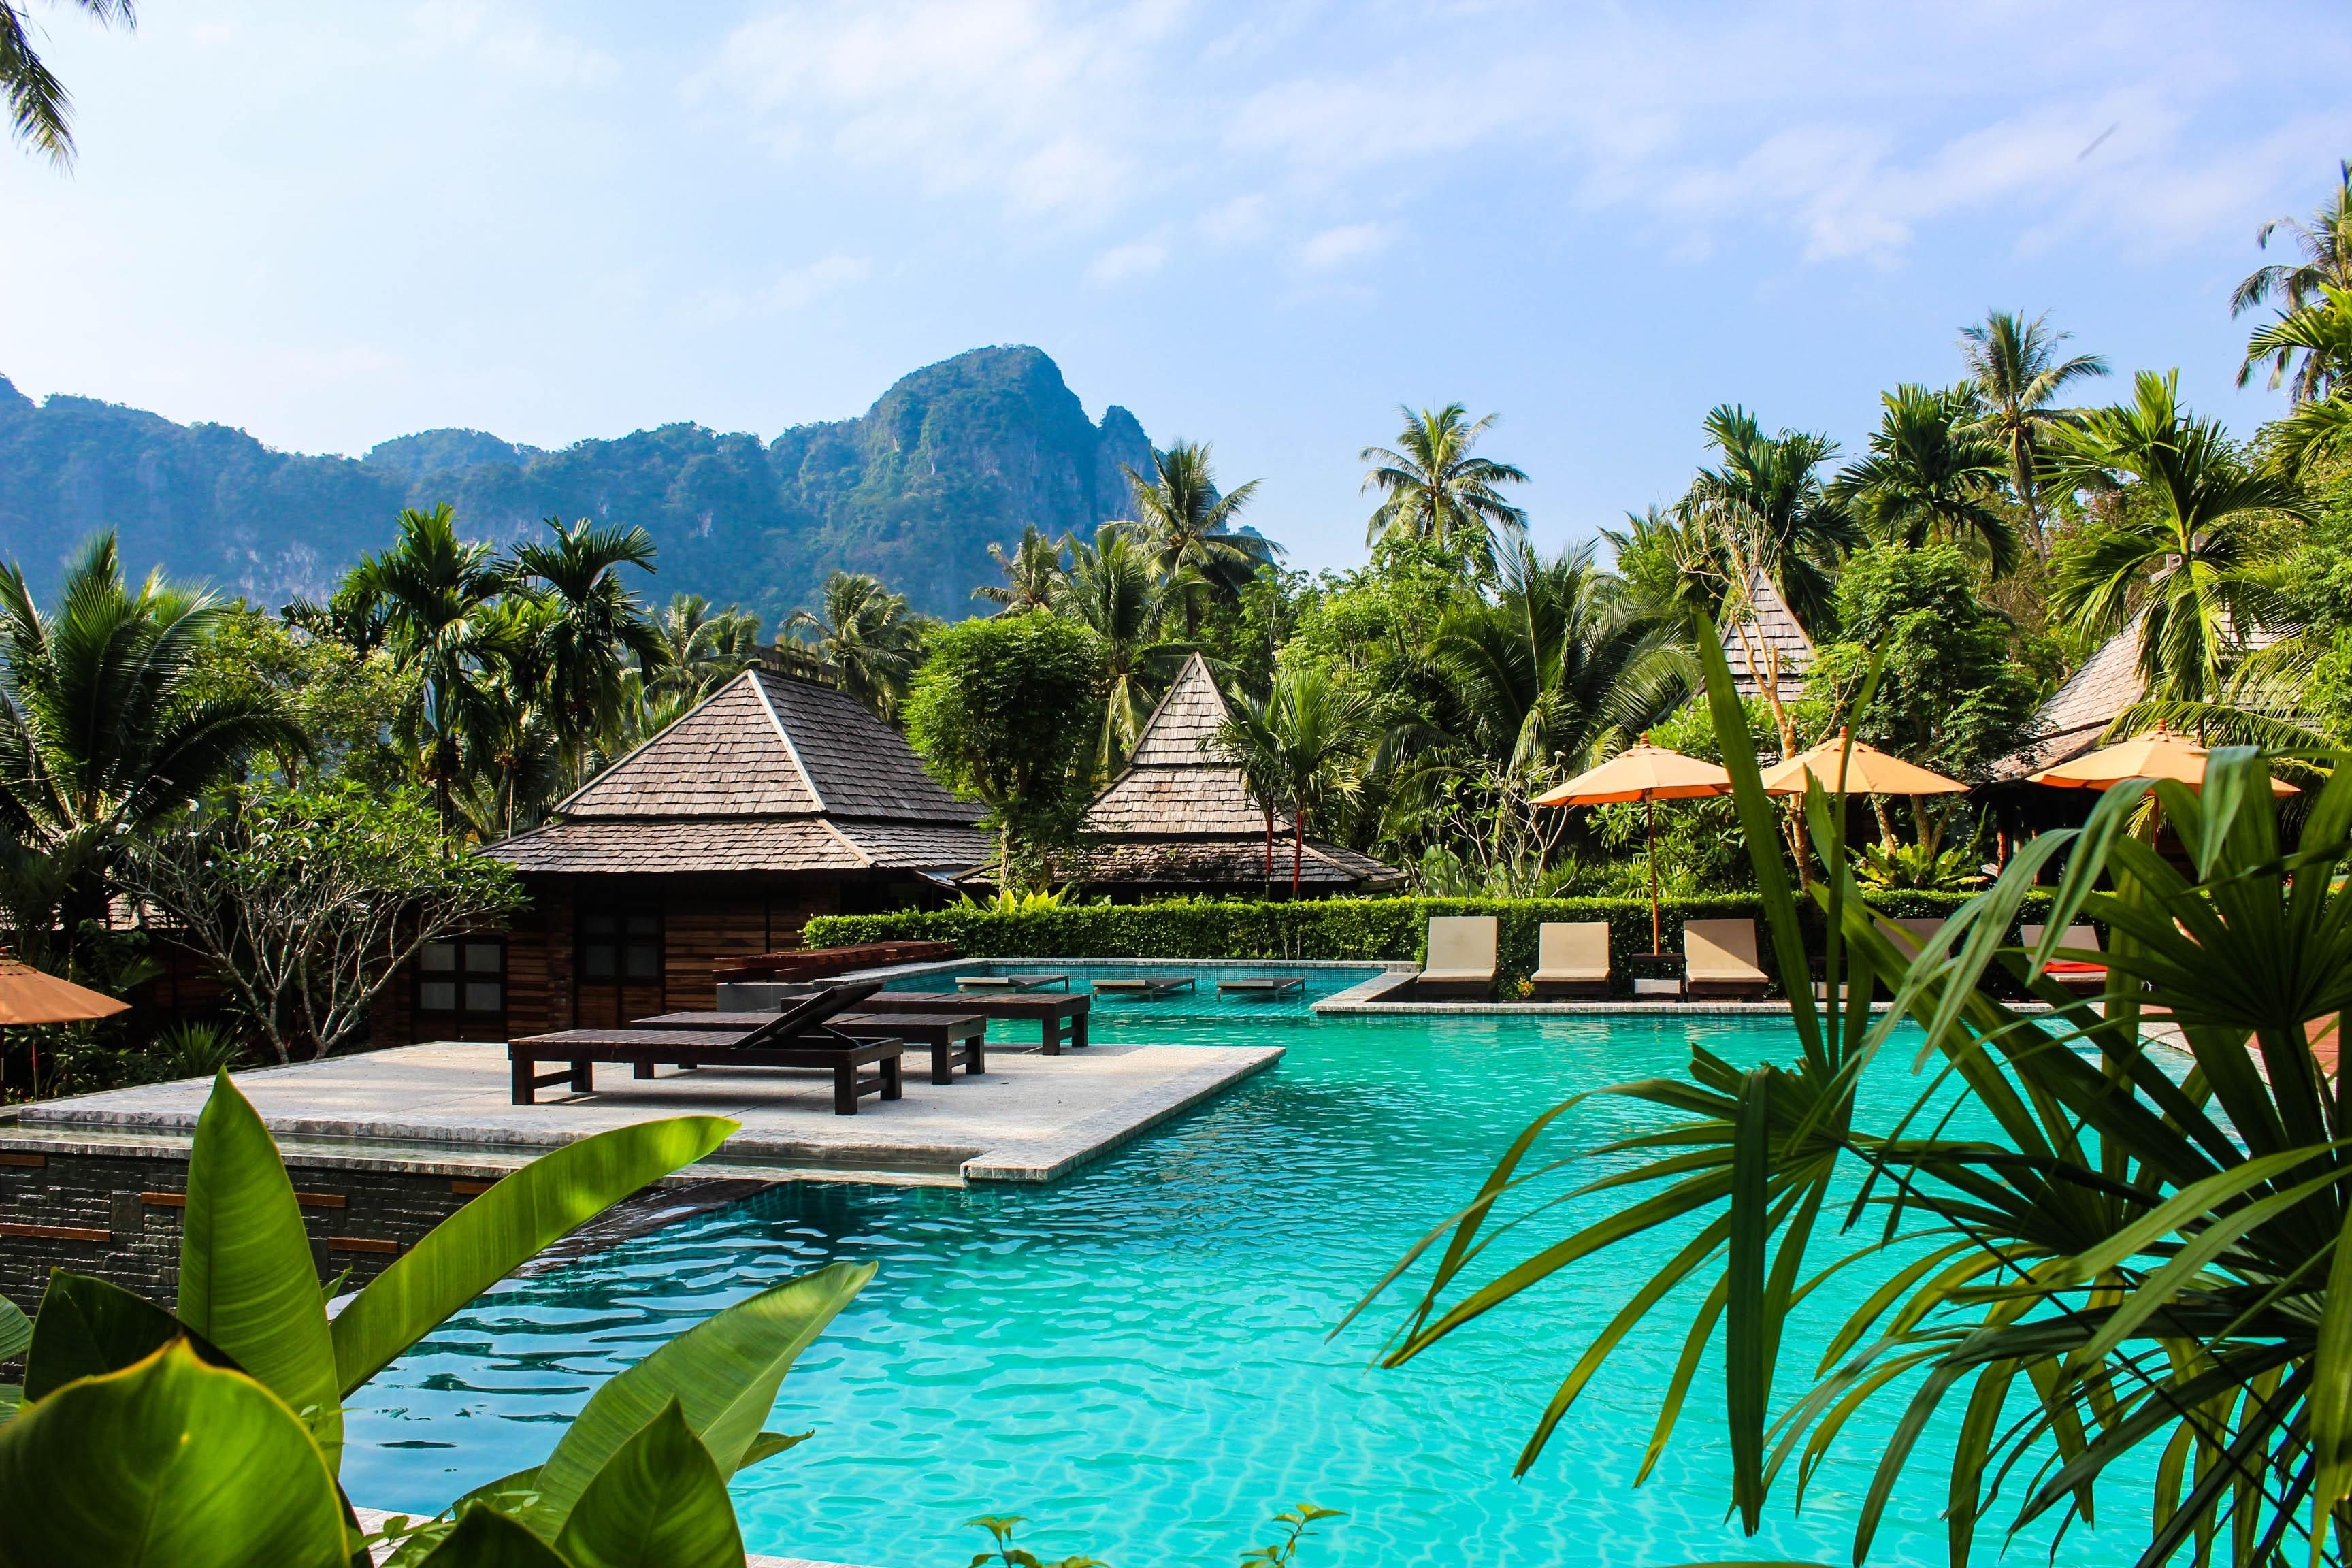 view of mountains, huts, and a swimming pool in Thailand.